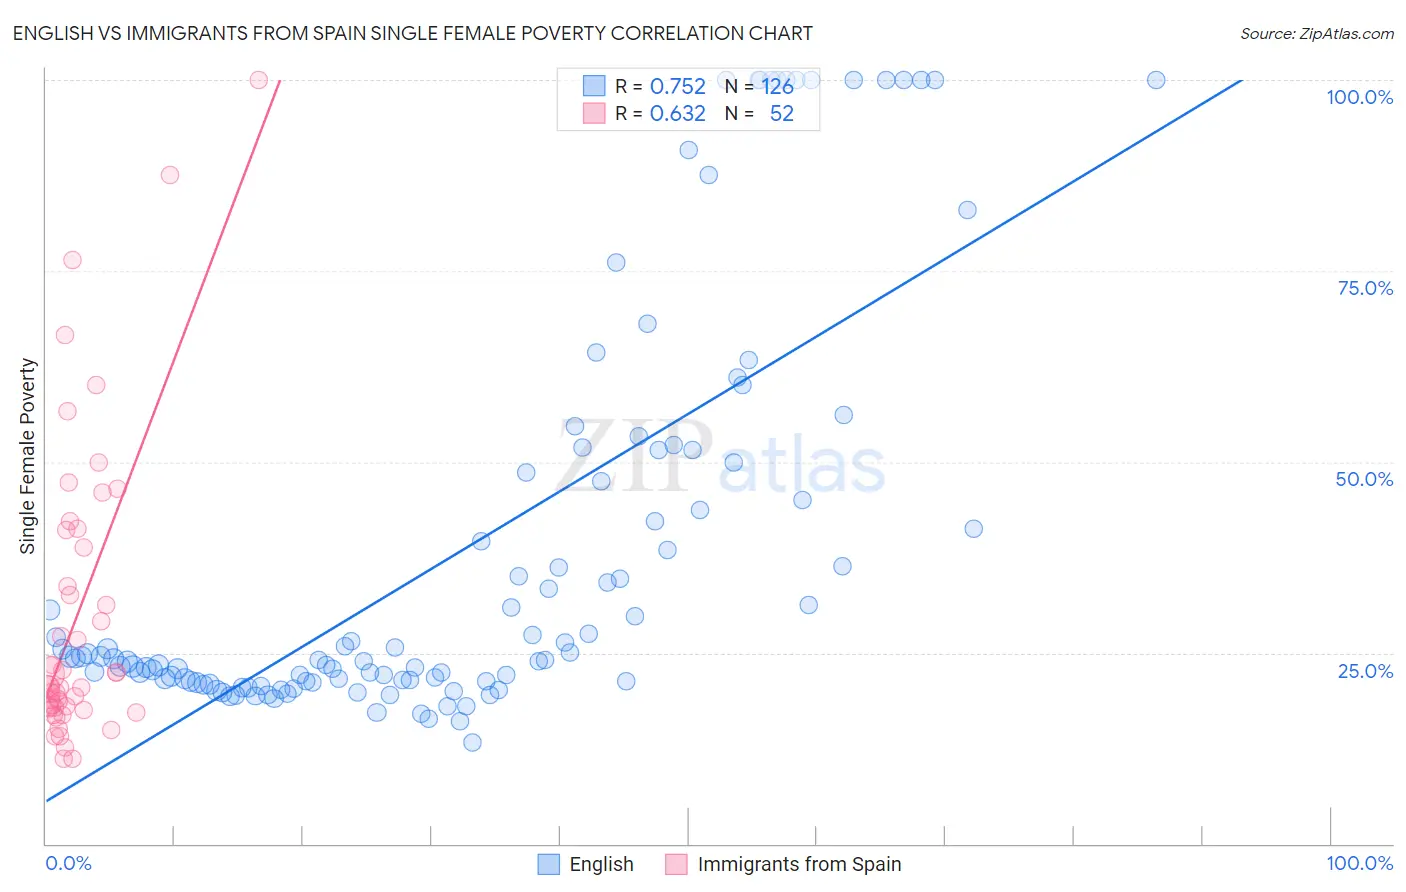 English vs Immigrants from Spain Single Female Poverty